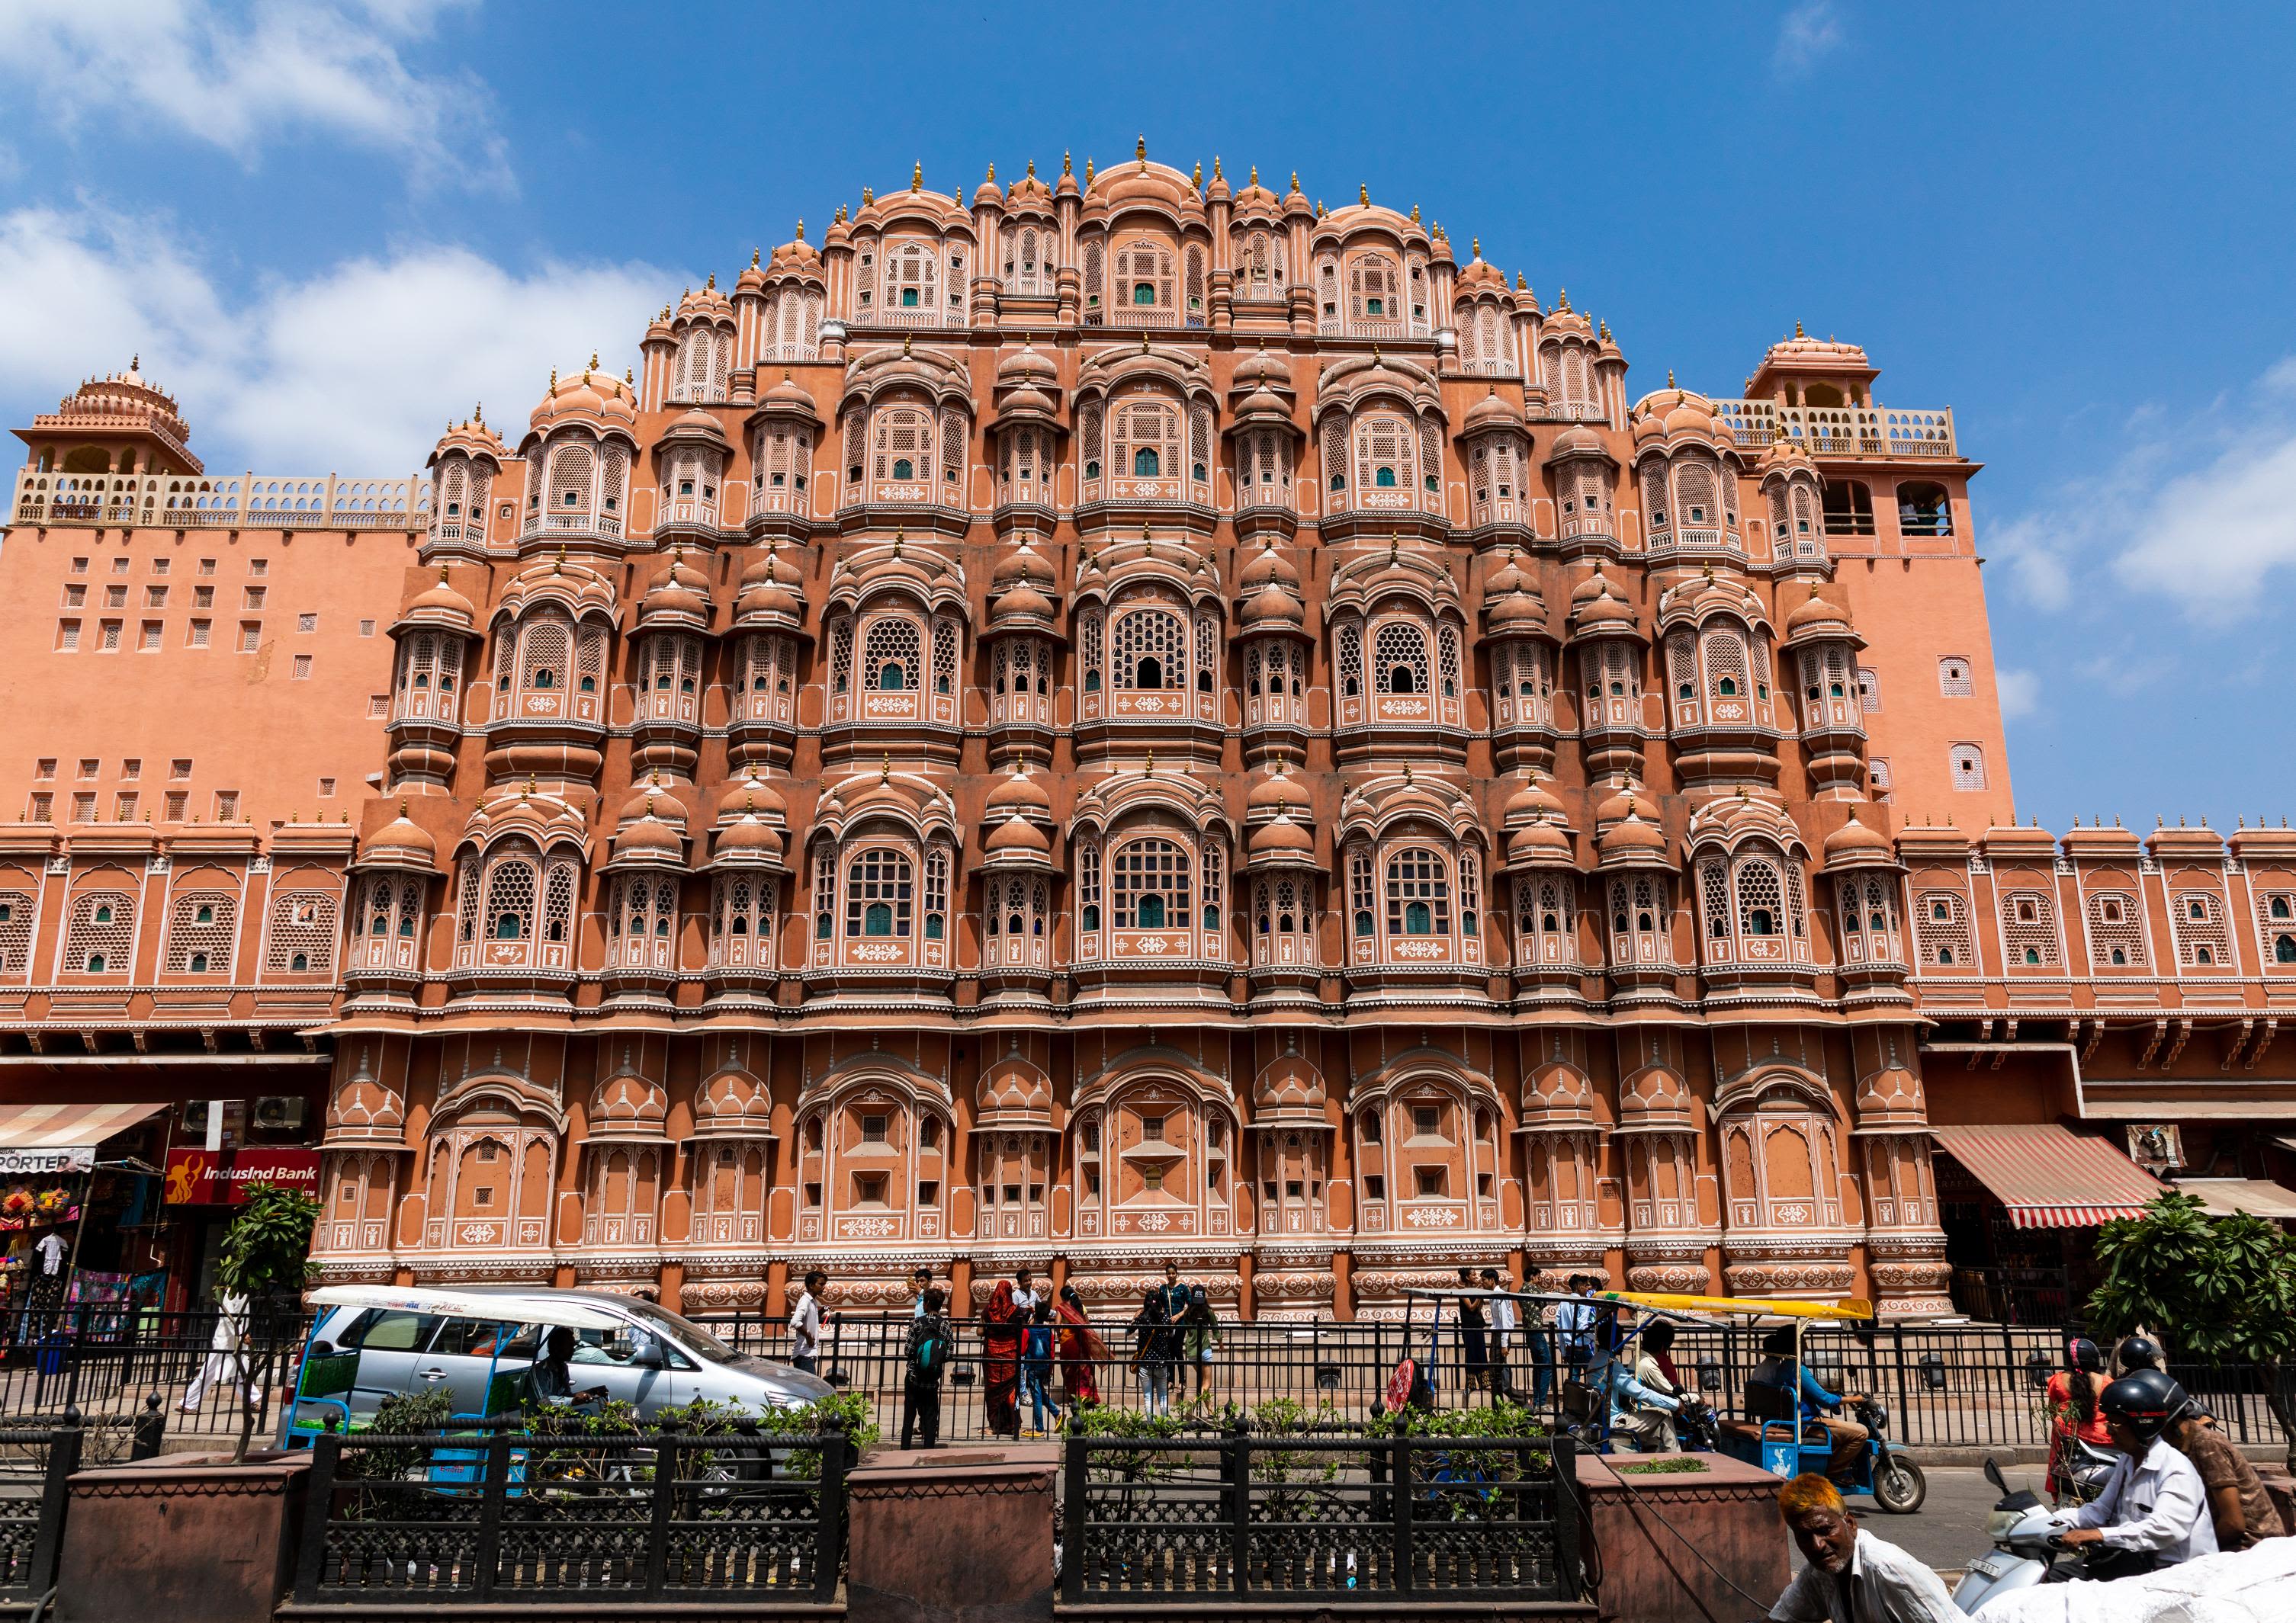 12 famous buildings in India: From ancient wonders to modern